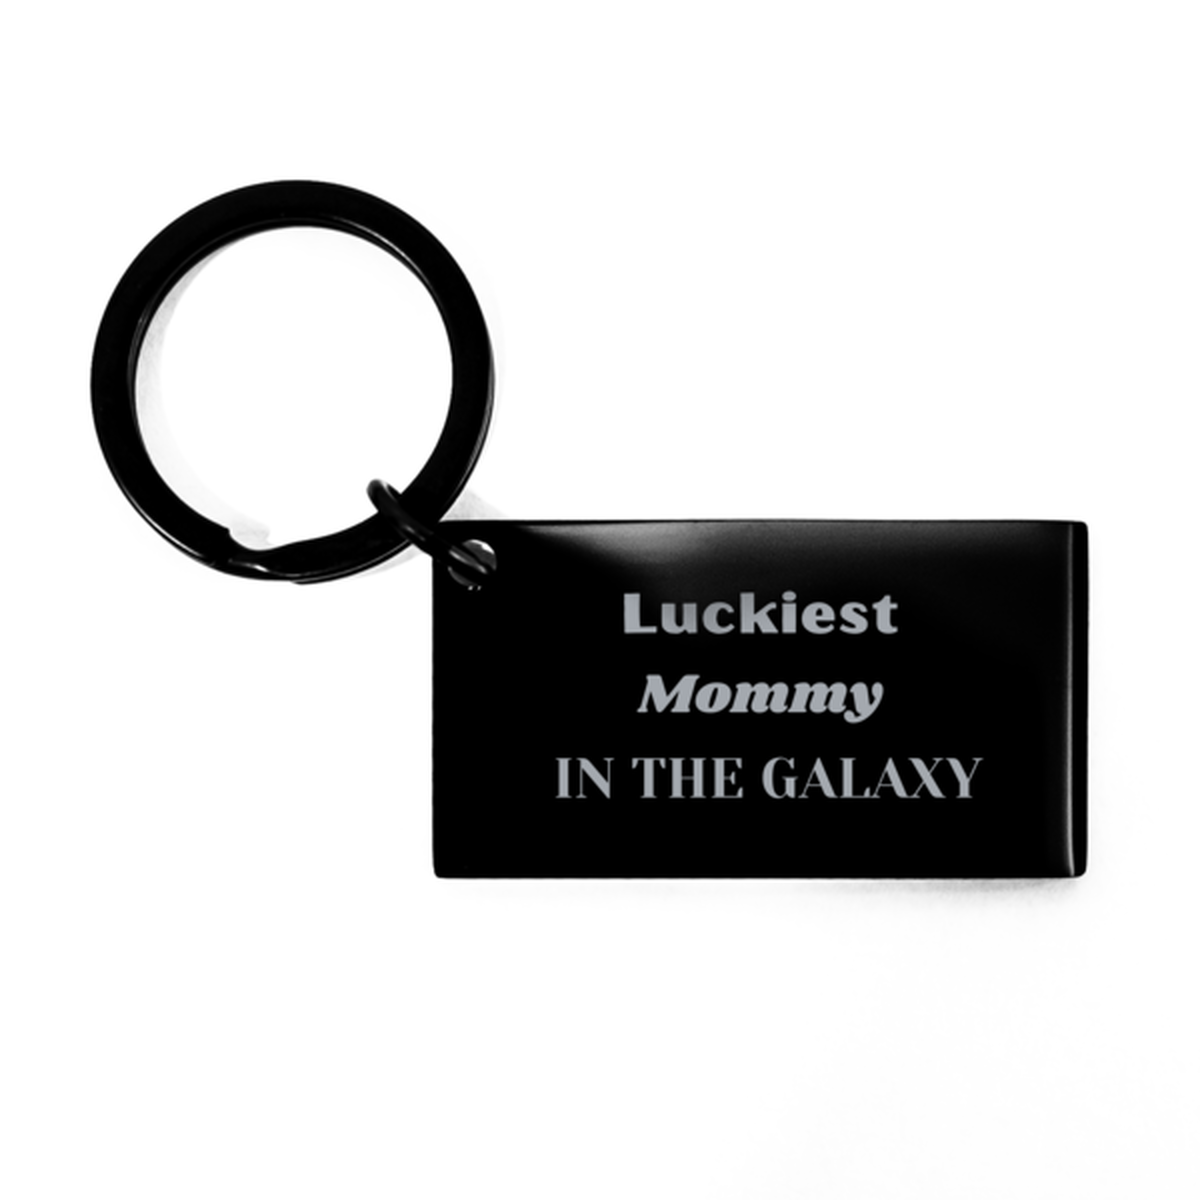 Luckiest Mommy in the Galaxy, To My Mommy Engraved Gifts, Christmas Mommy Keychain Gifts, X-mas Birthday Unique Gifts For Mommy Men Women